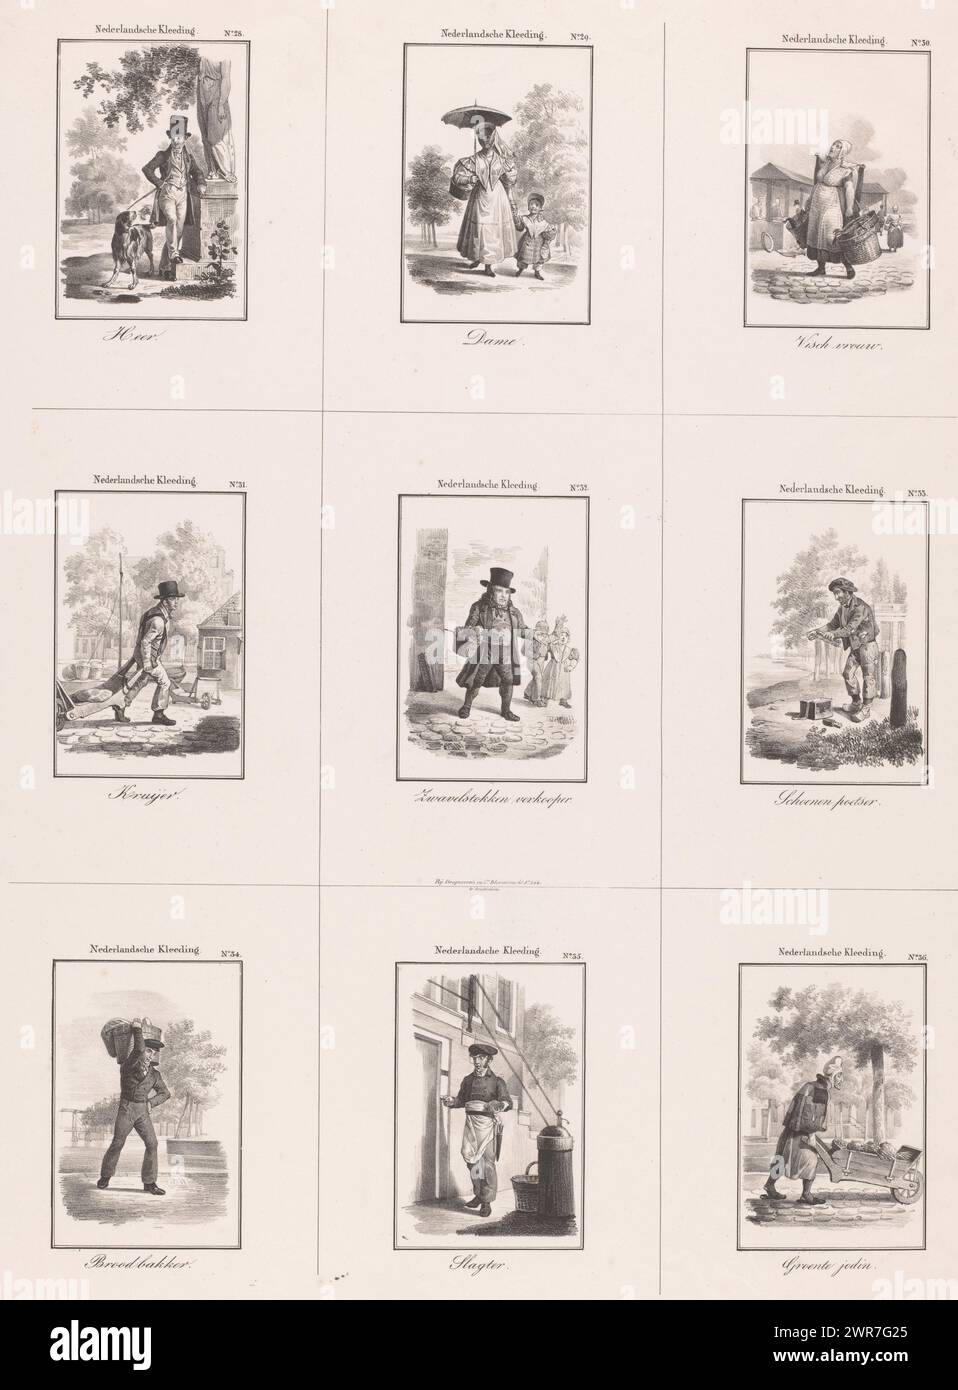 Clothing of Dutch citizens, Dutch clothing (series title on object), Depicted are nine figures: a gentleman, a lady, a fishwife, a porter, a match seller, a shoe shiner, a baker, a butcher and a greengrocer. All performances are numbered. Below each figure is its profession. The series contains at least 36 performances., print maker: anonymous, printer: Desguerrois & Co., Amsterdam, 1827 - 1907, paper, height 550 mm × width 400 mm, print Stock Photo